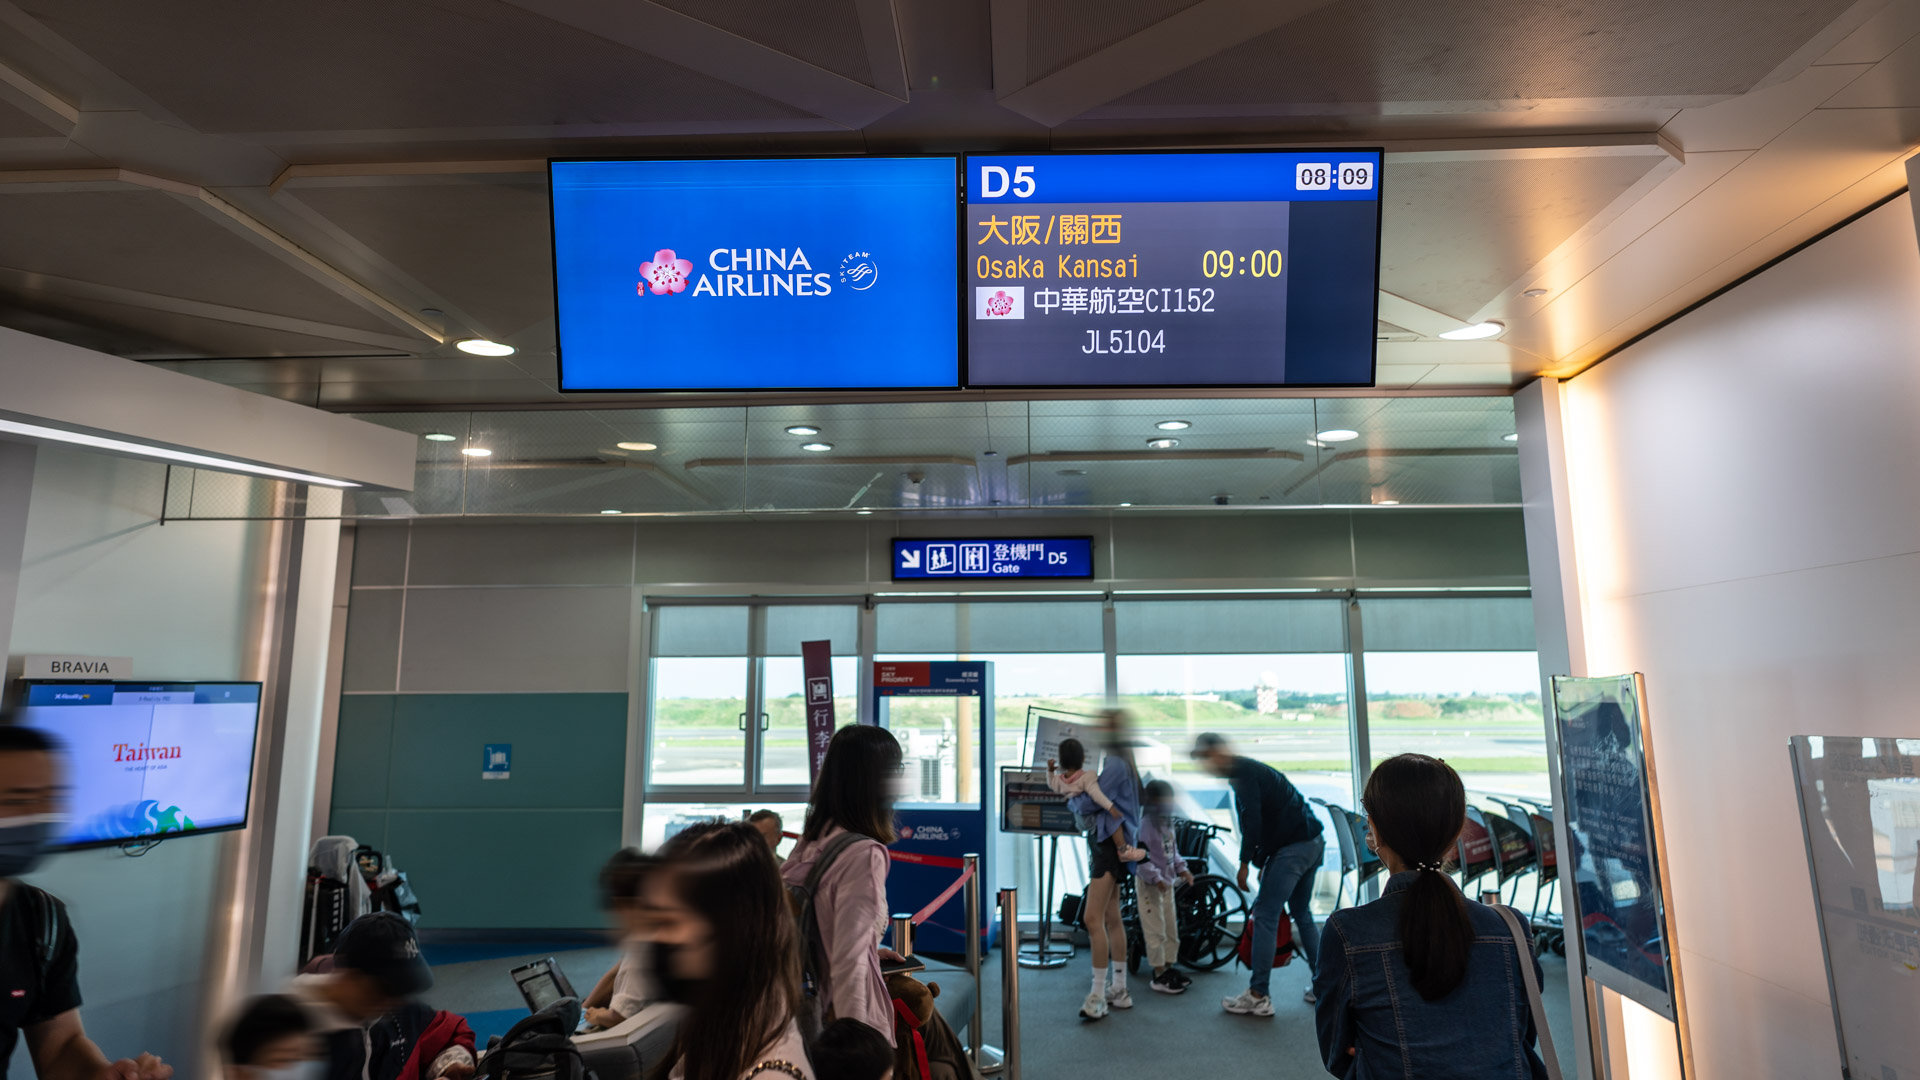 China Airlines Boeing 777 Business Class boarding